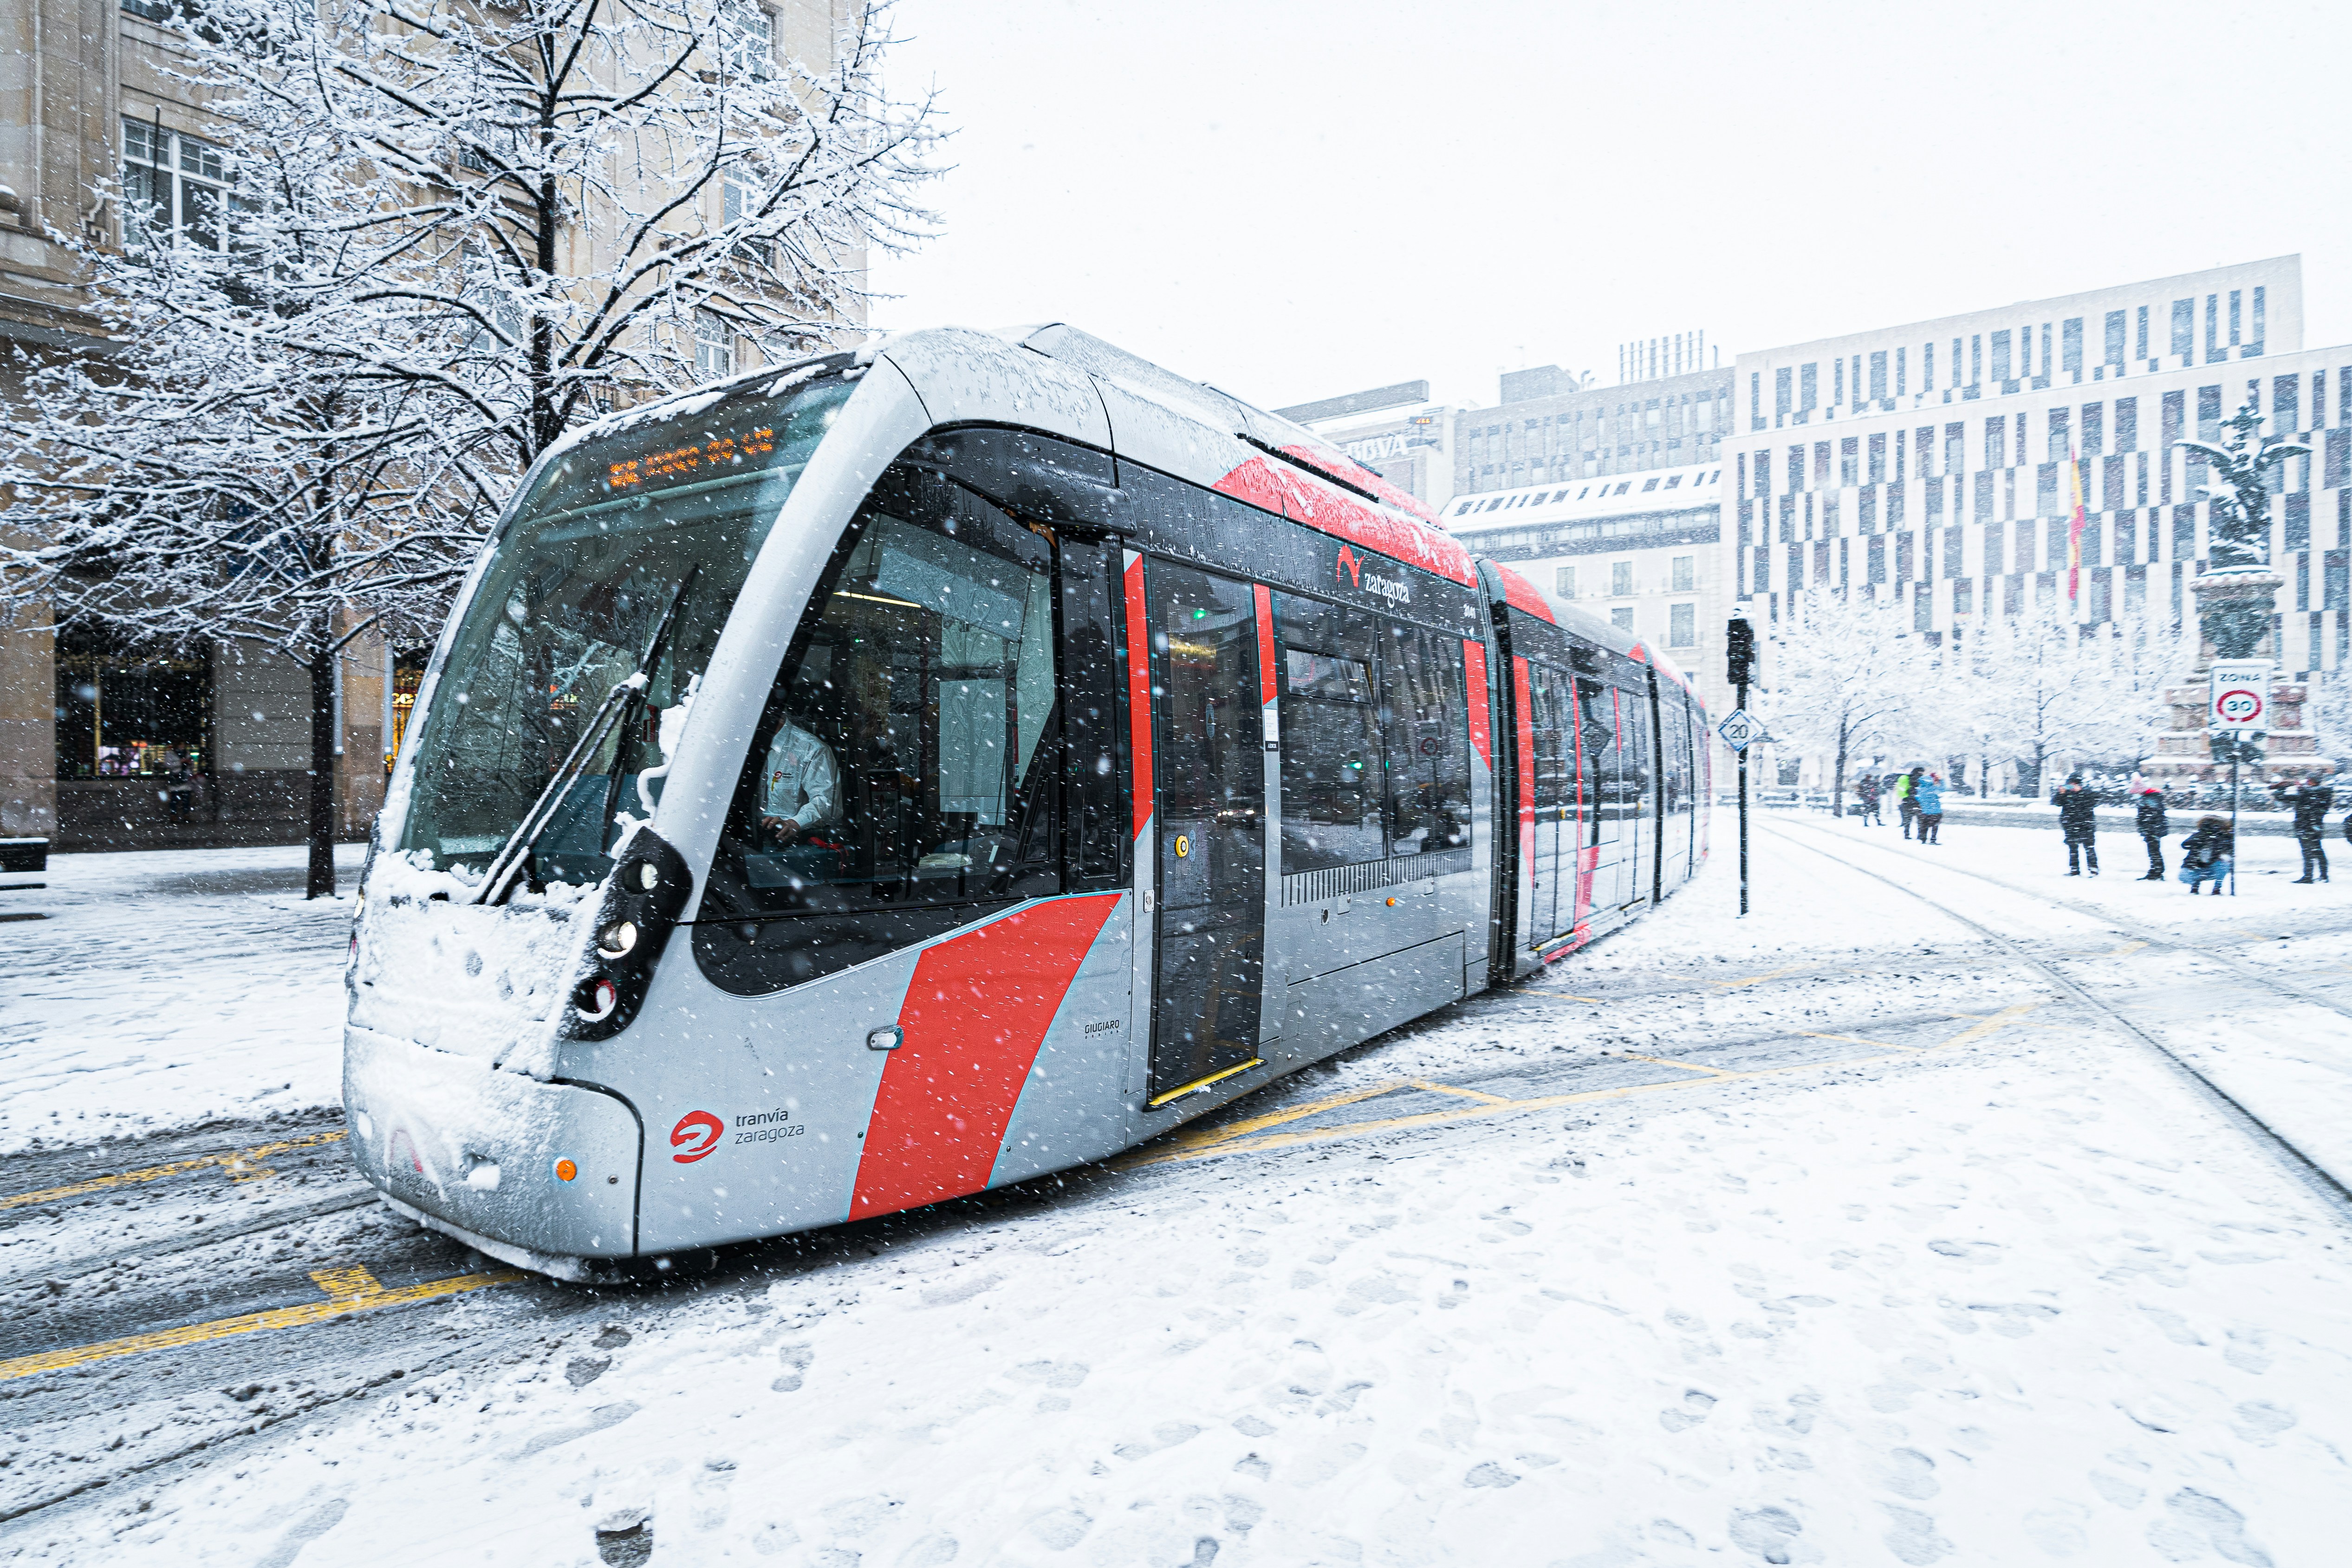 Tramway through the snow.